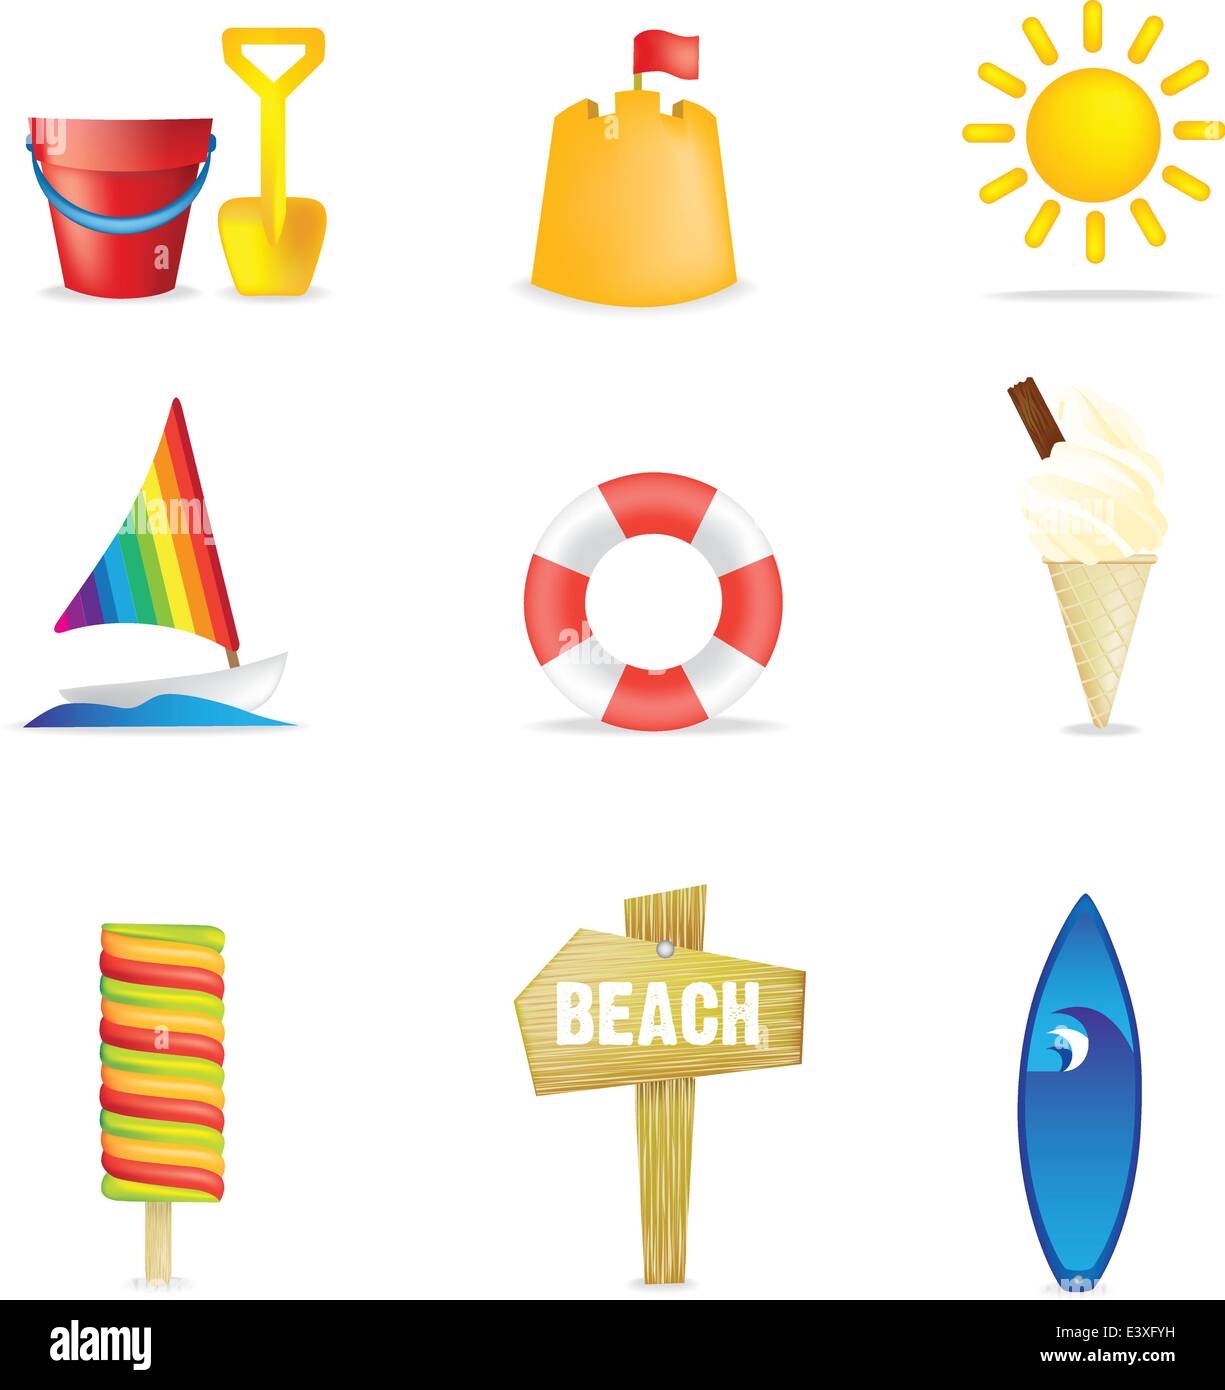 Set of 9 3d beach images Stock Vector